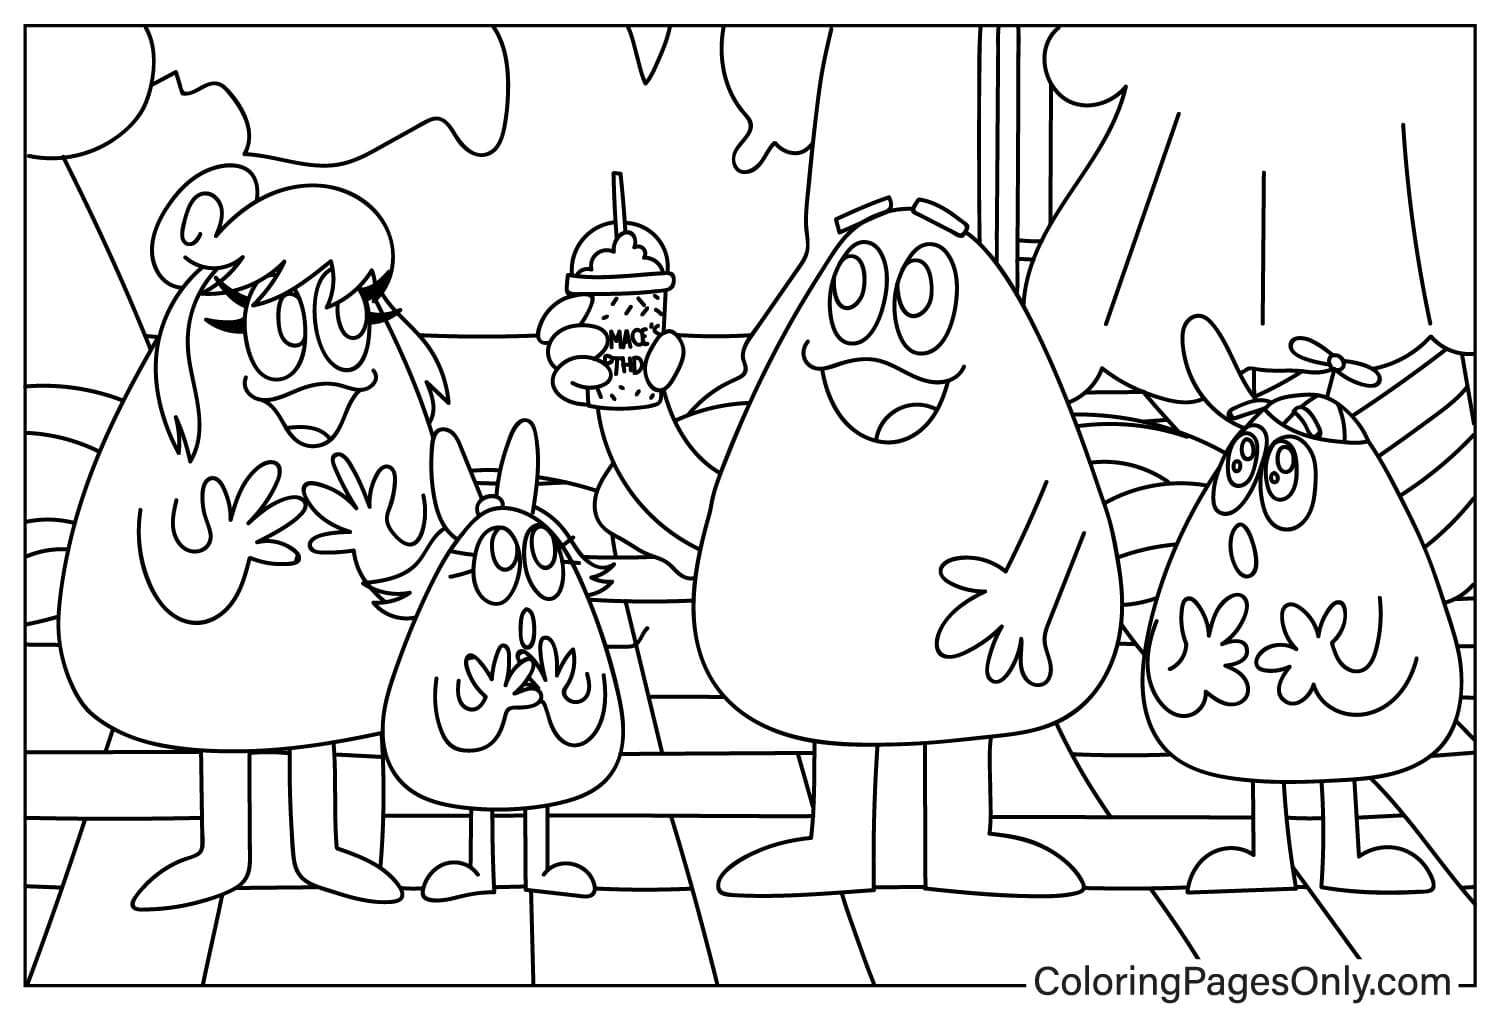 Family Grimace Coloring Page from Grimace